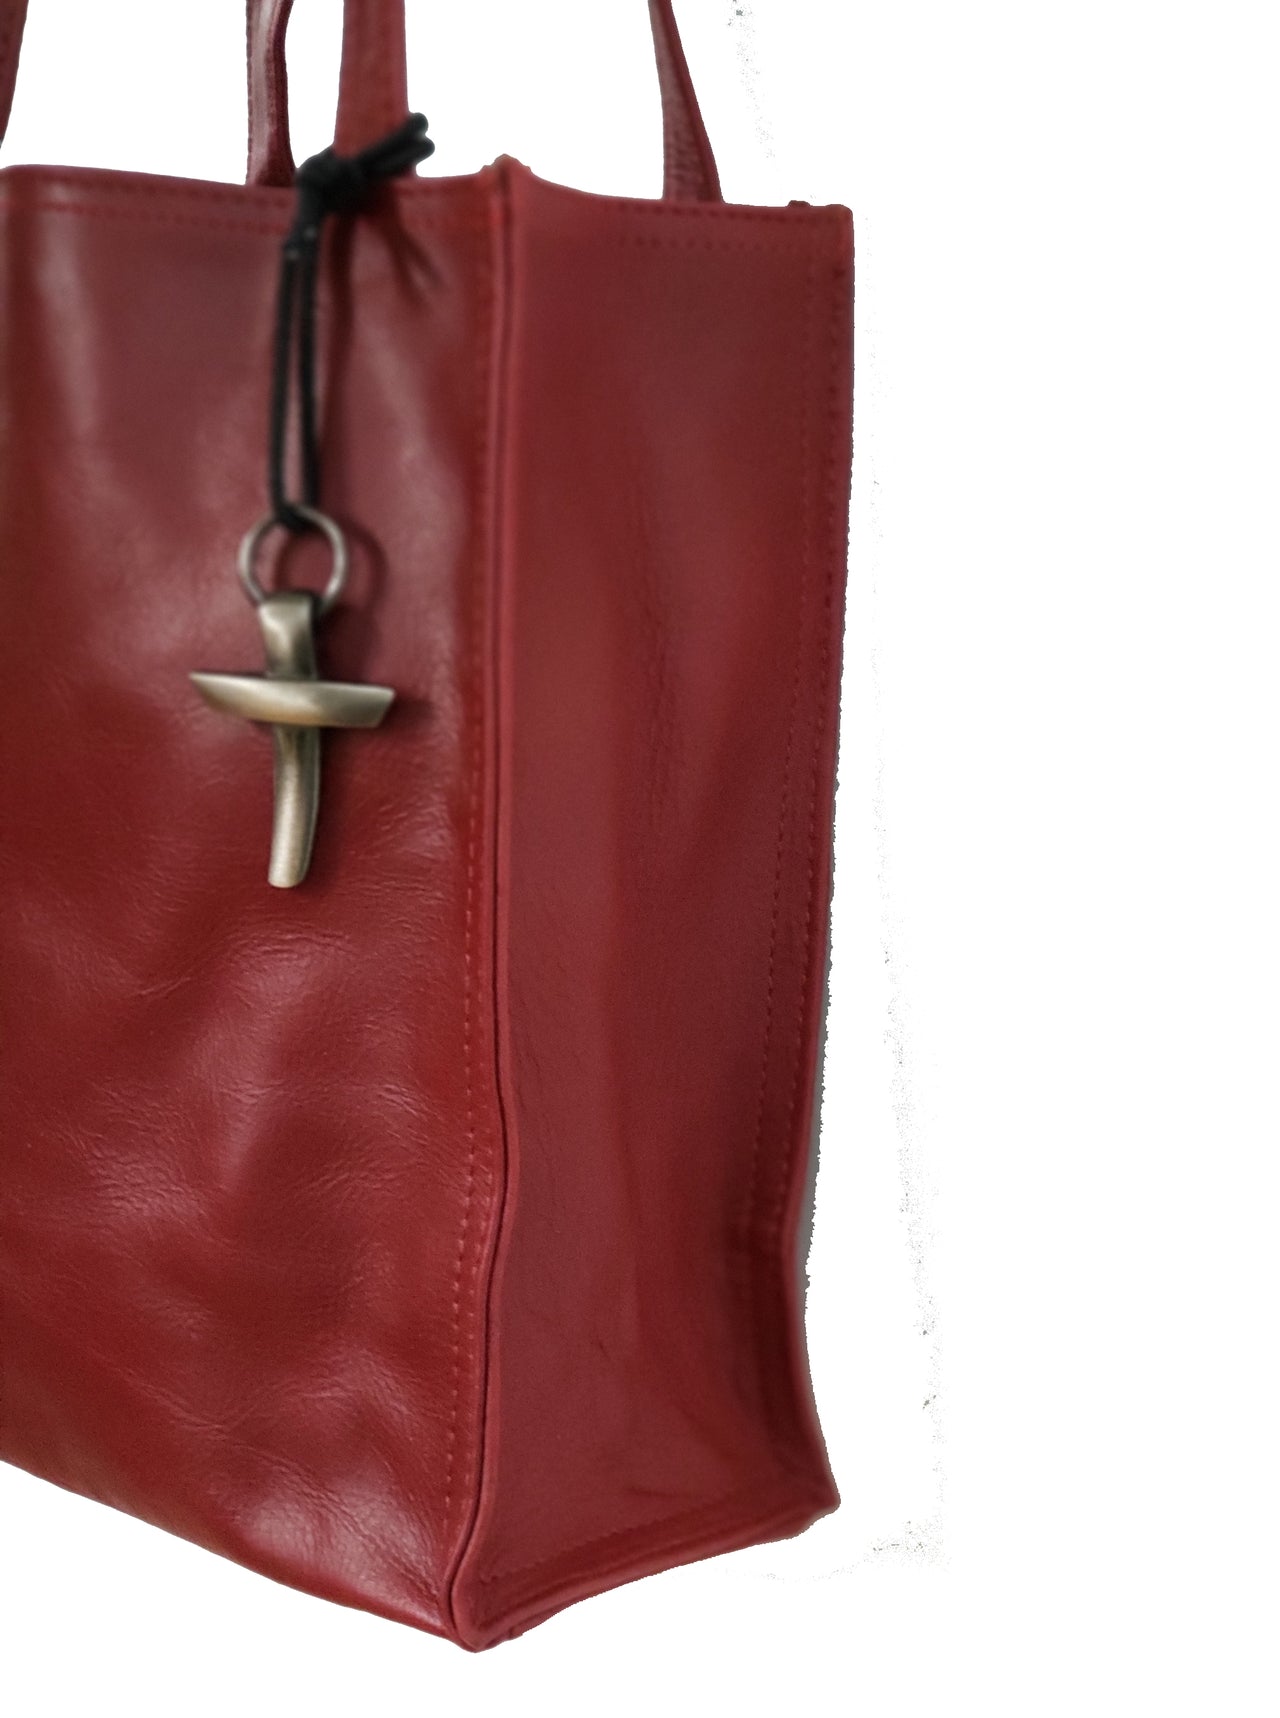 Leather Tote Bag by Crimson Truth Black